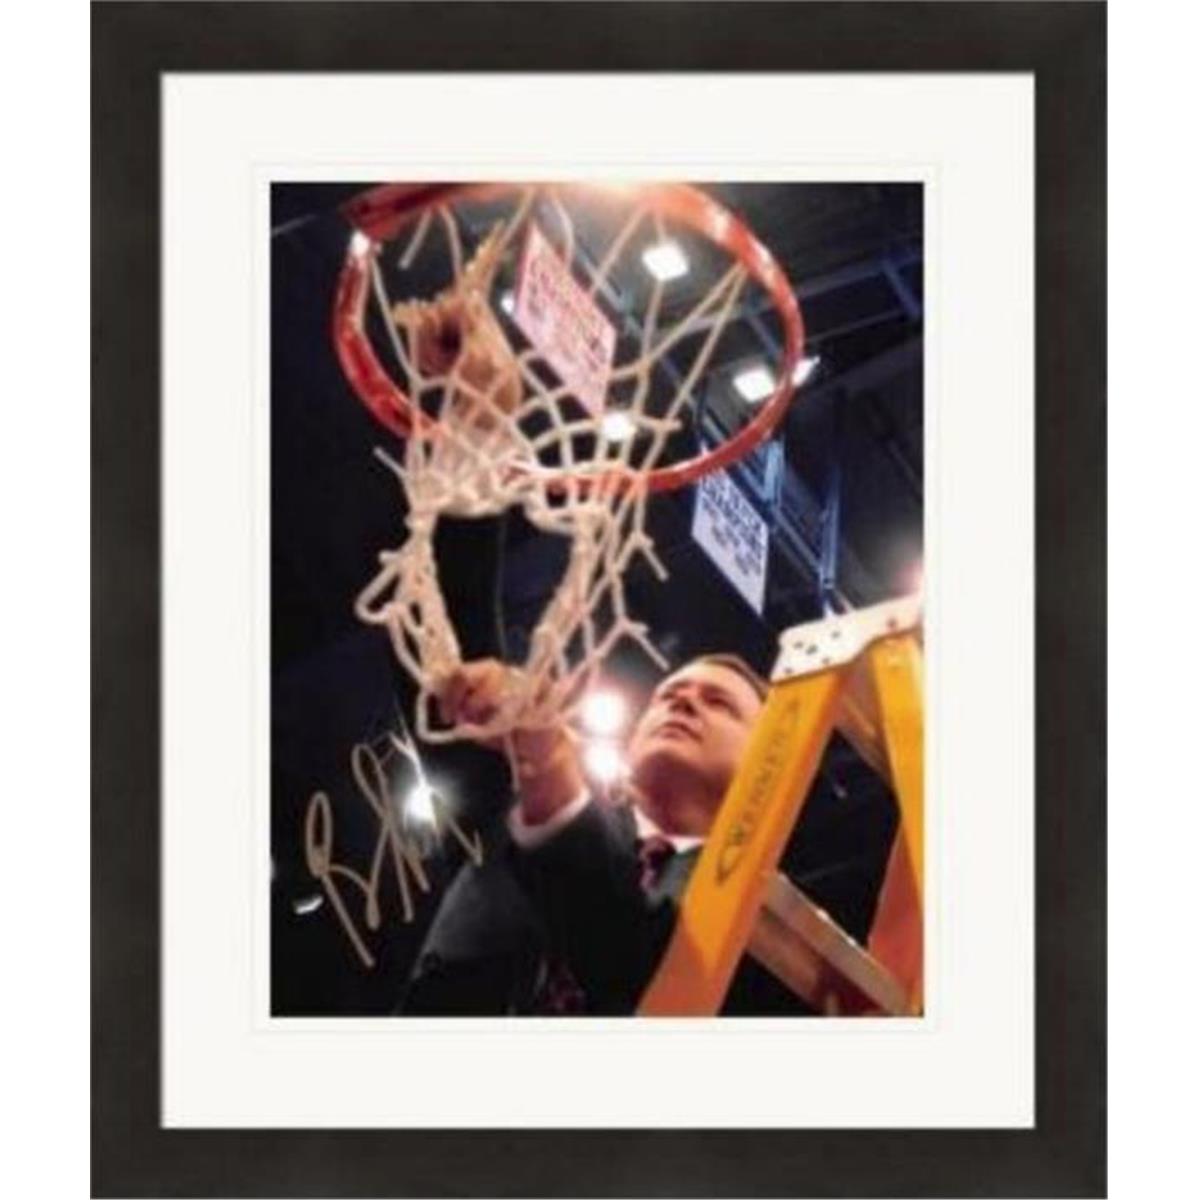 Picture of Autograph Warehouse 409356 8 x 10 in. Bill Self Autographed Matted & Framed Photo - Kansas Jayhawks Coach No.SC5